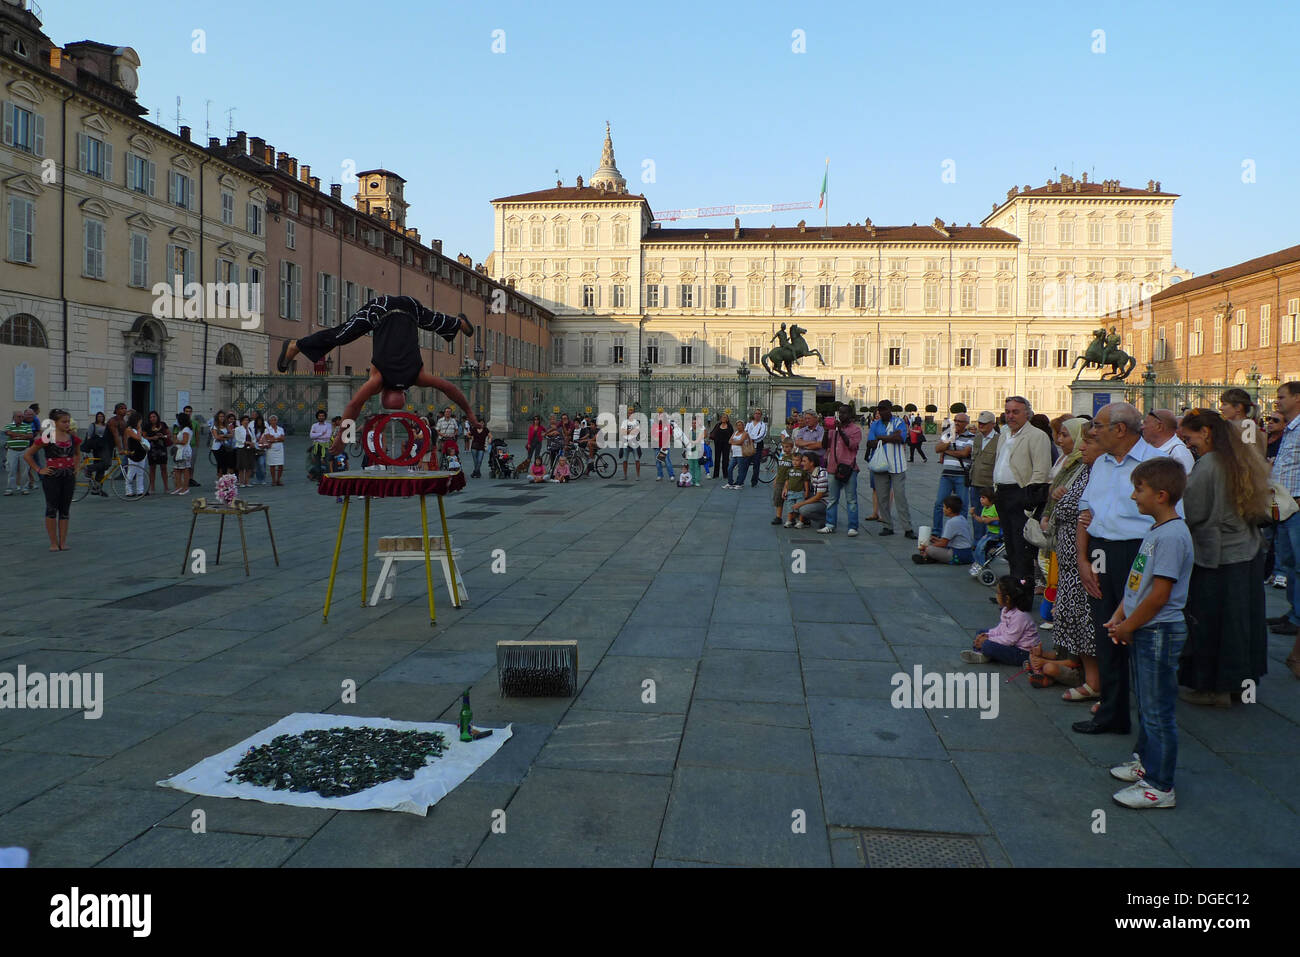 Piazza Castello, Turin, street performers perform in front of many people Stock Photo